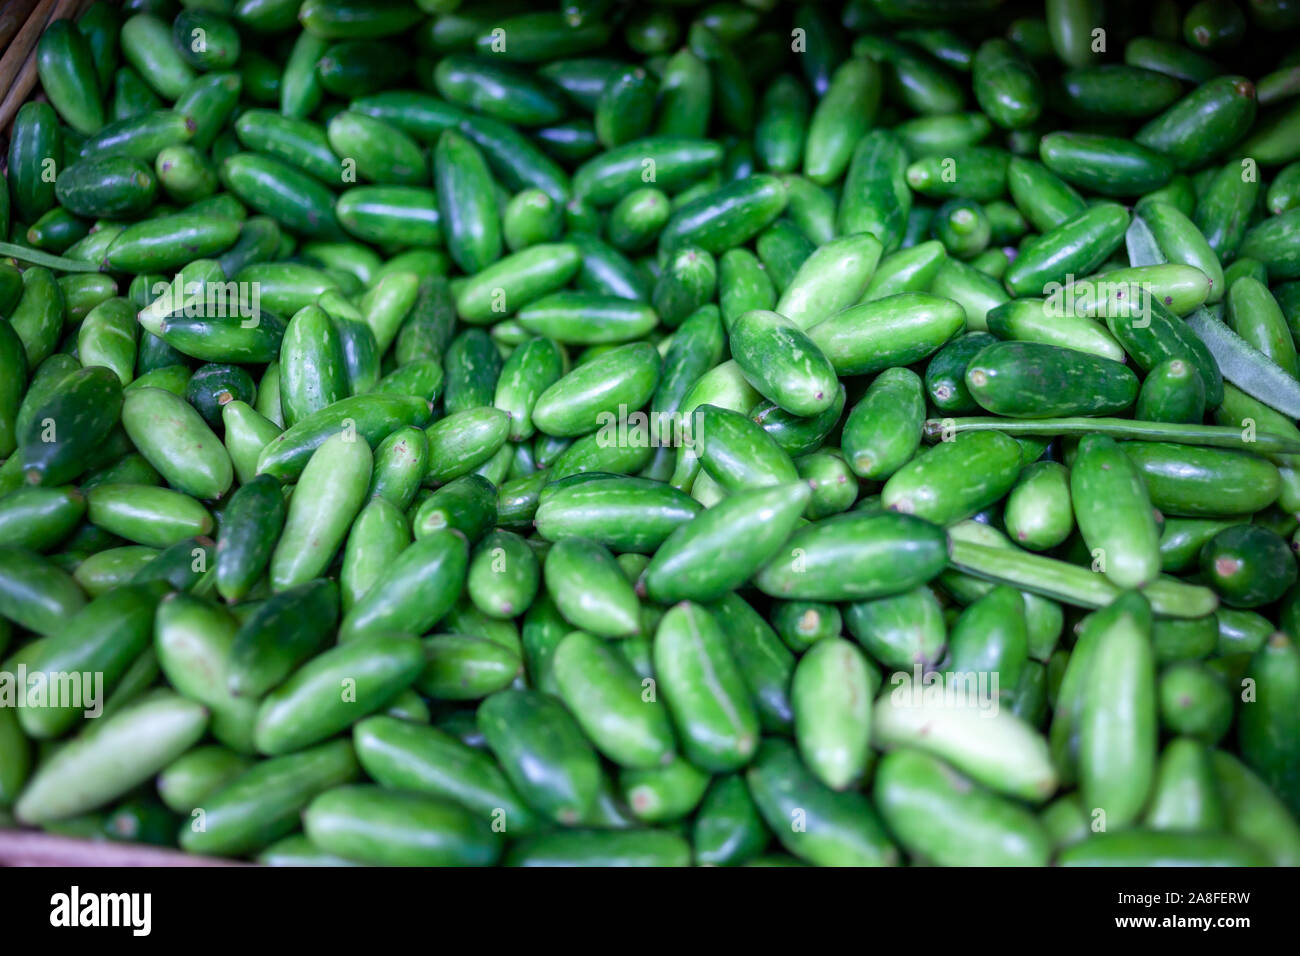 A basket full of cucumbers. Nicely displayed at a market stand in Little India, Singapore. Stock Photo